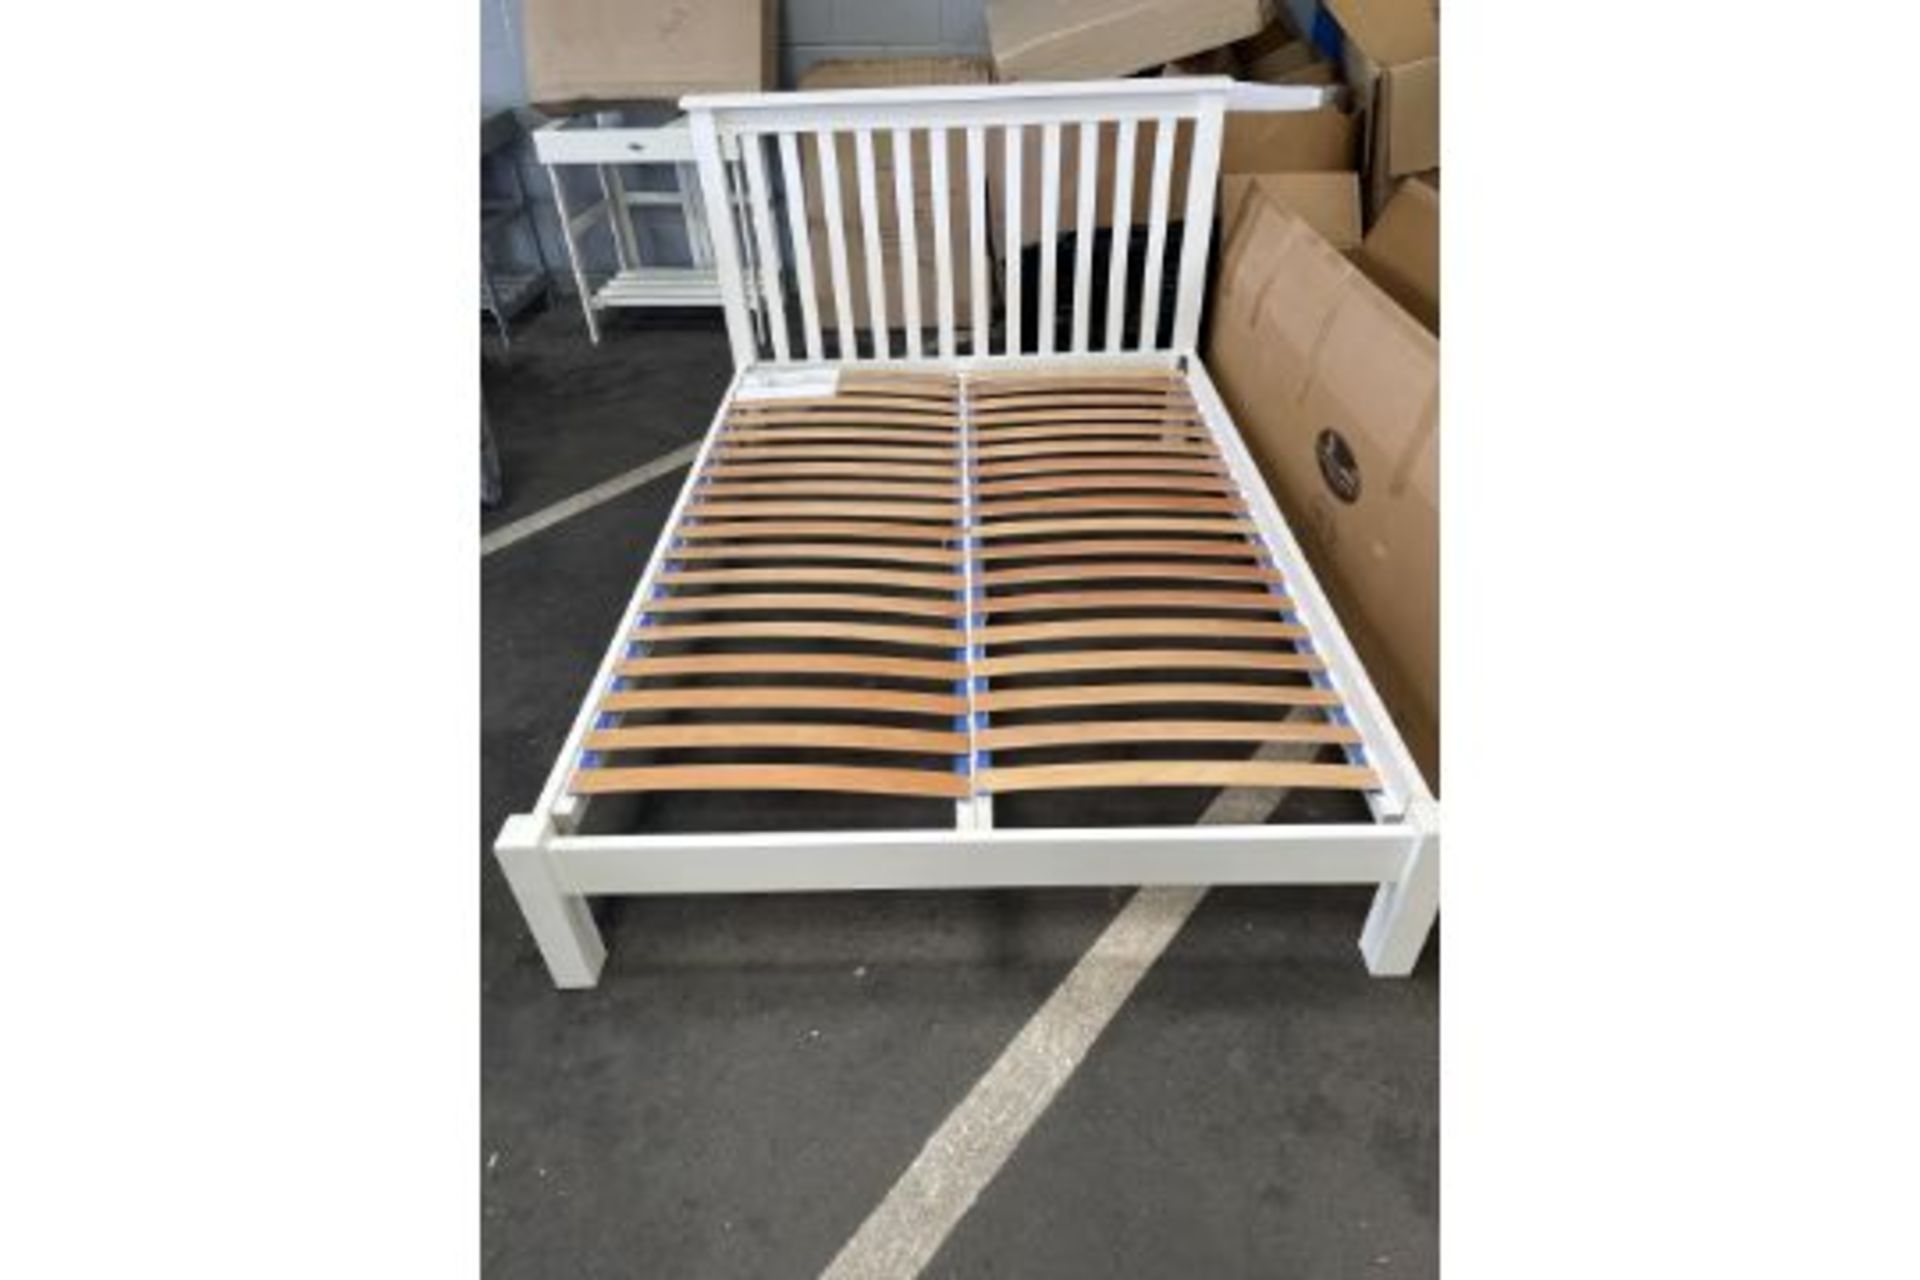 New Dunelm 4ft 6 Double White Solid Wood Bed Frame (3 boxes) - RRP £439.99.